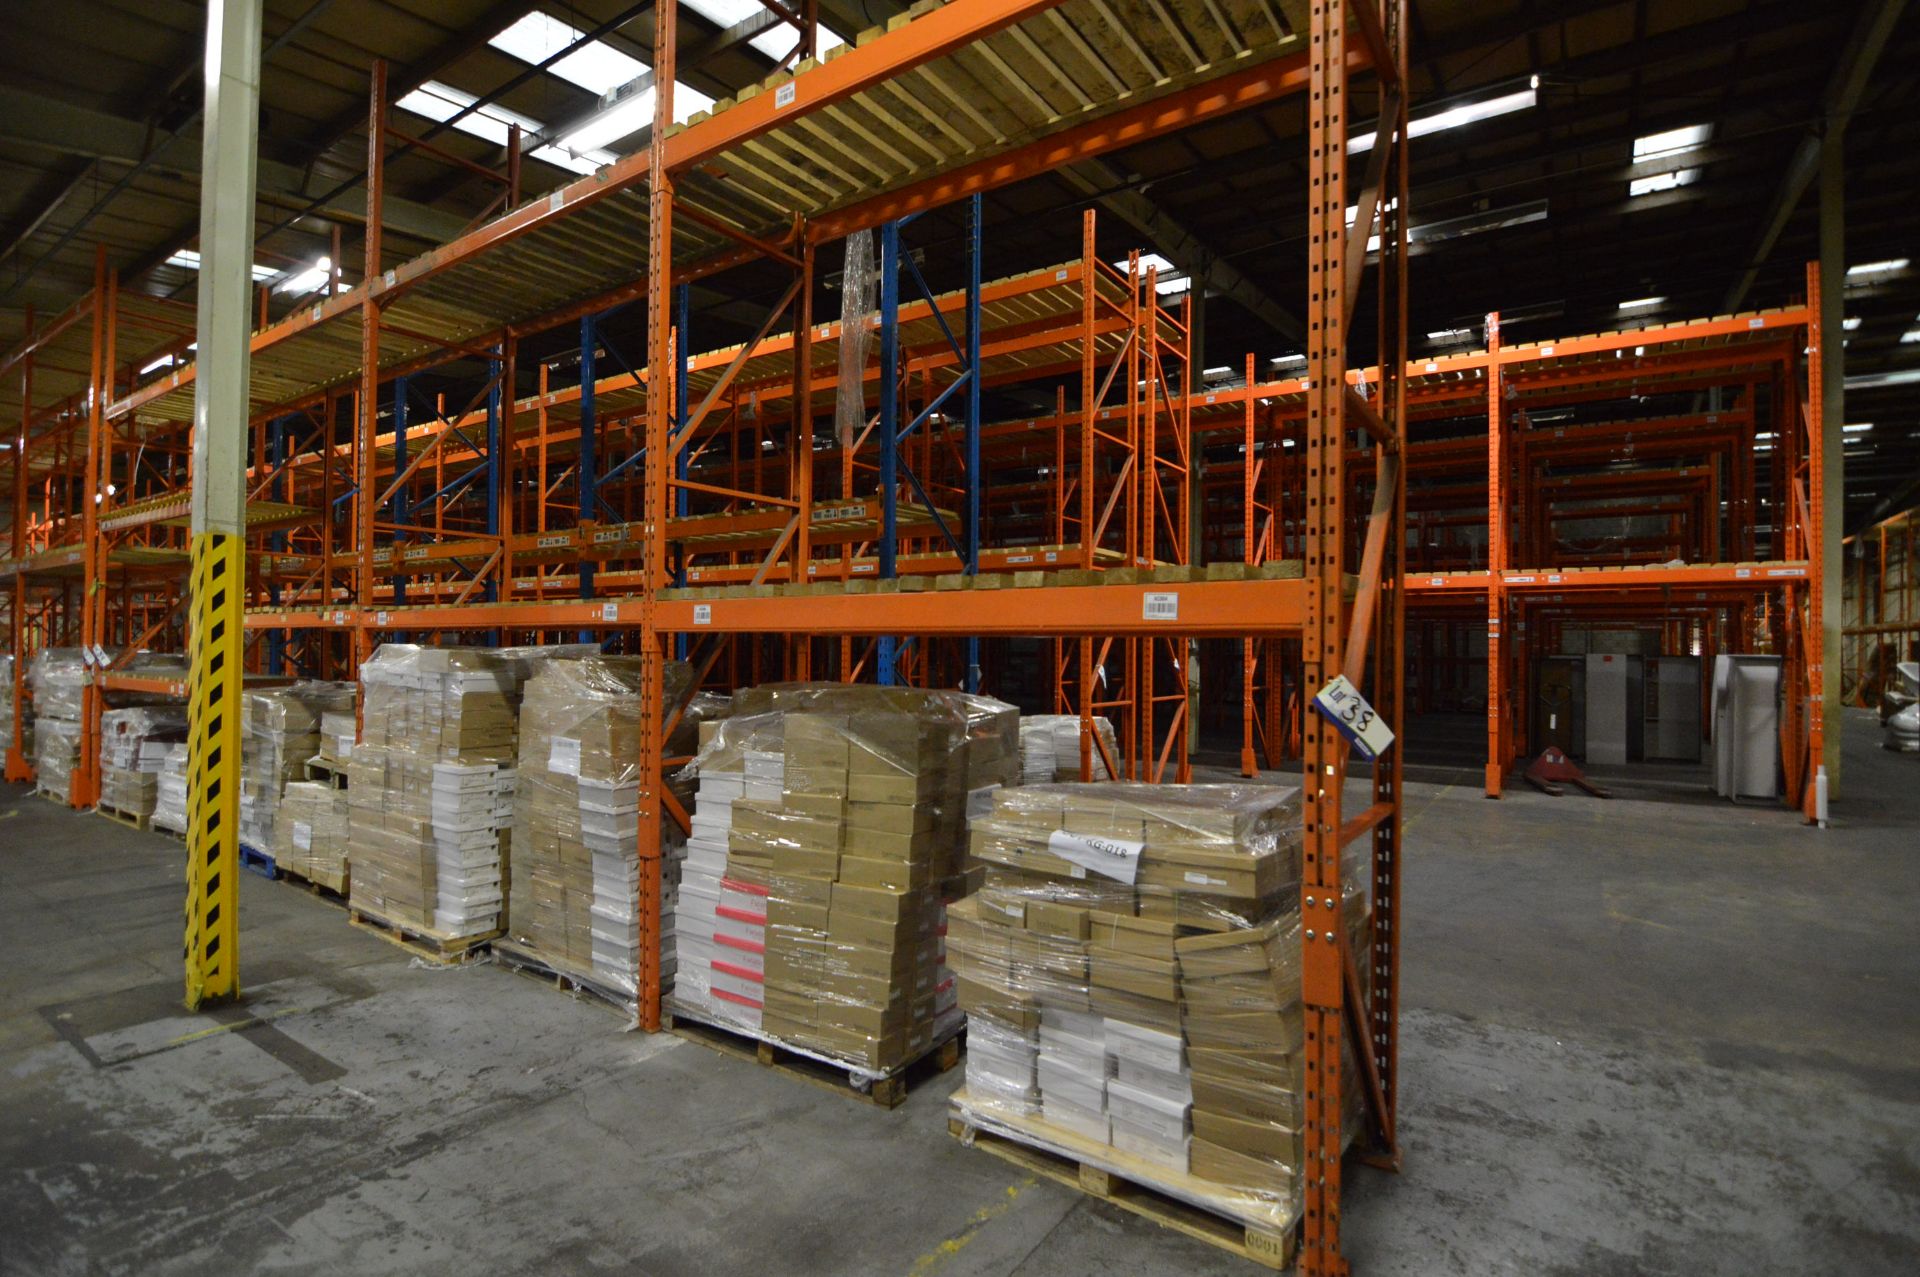 Redirack SD170 Single Sided Four Bay Two & Three Tier Pallet Rack, approx. 11m x 900mm x 5.1m